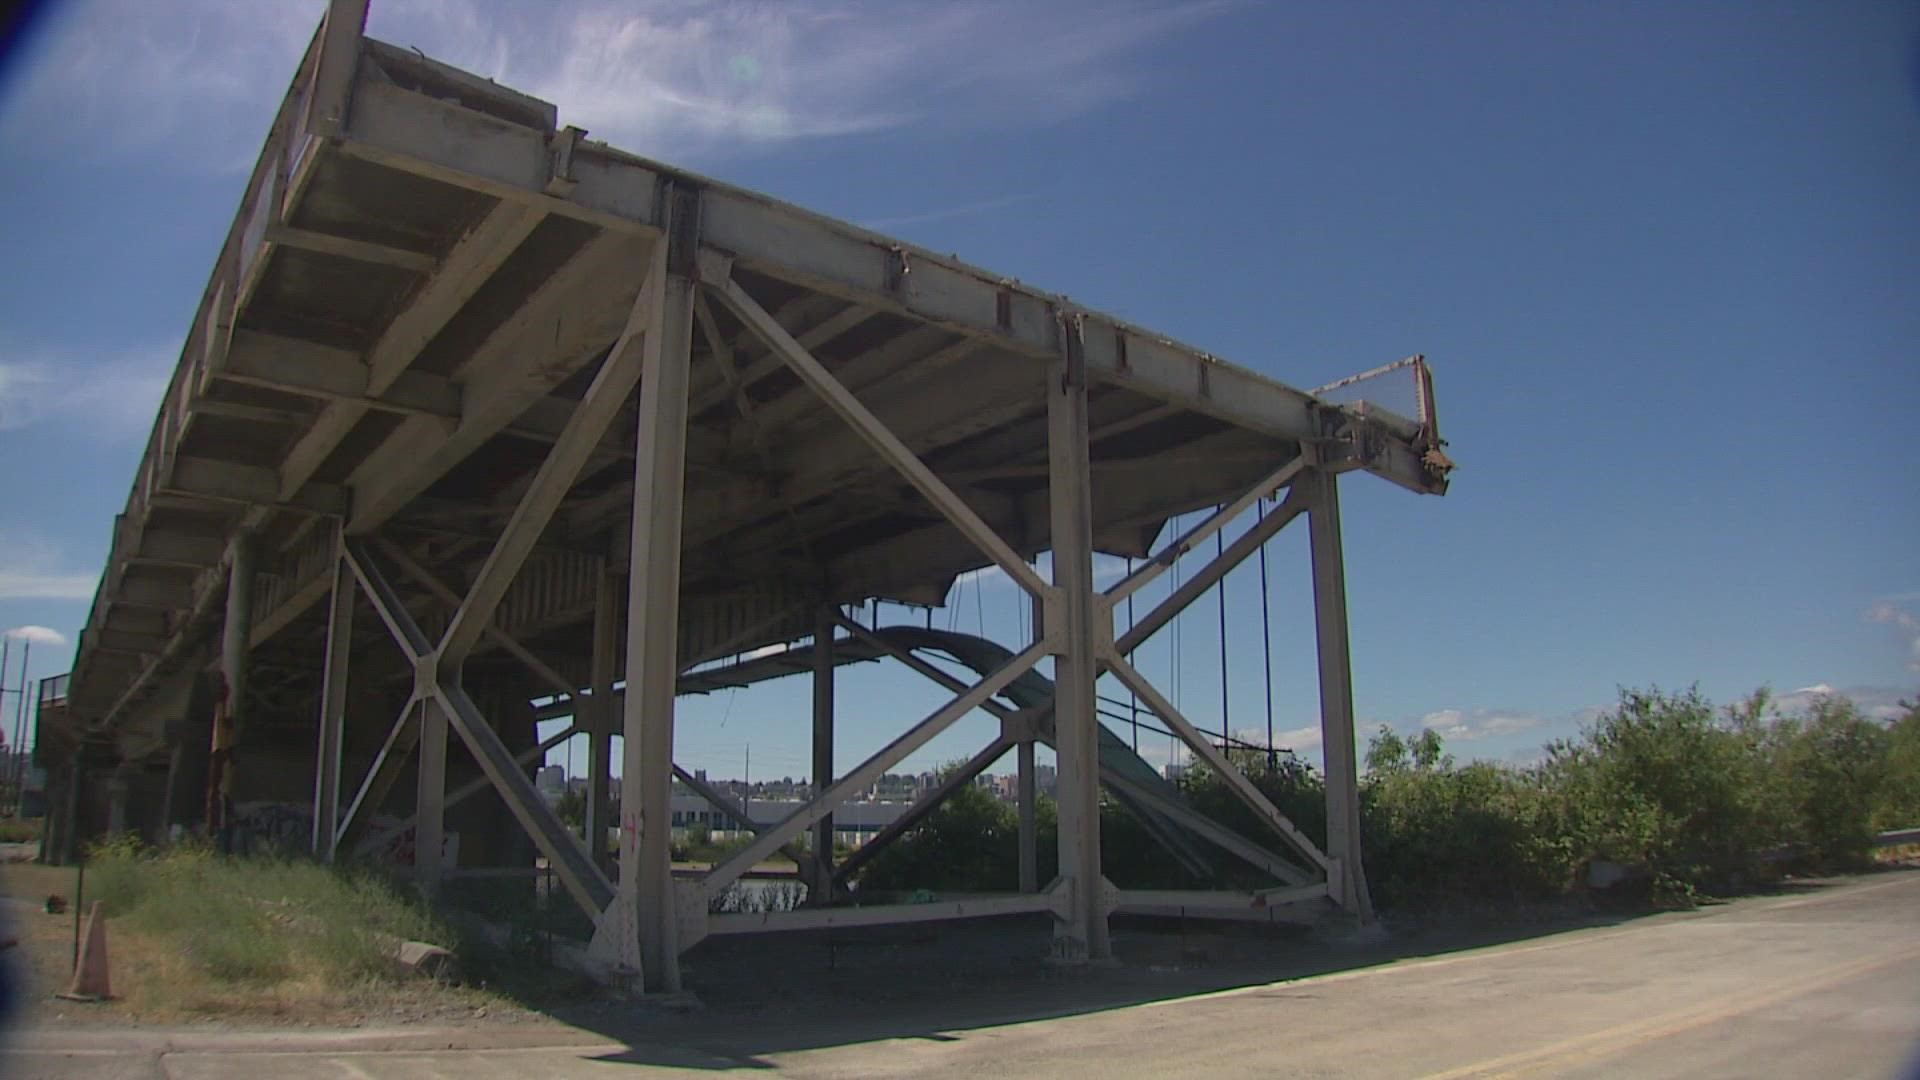 The city says adjustments to the E. 11th Street Bridge will not only help the Port’s operations, but make it safer for people to fish in the area.